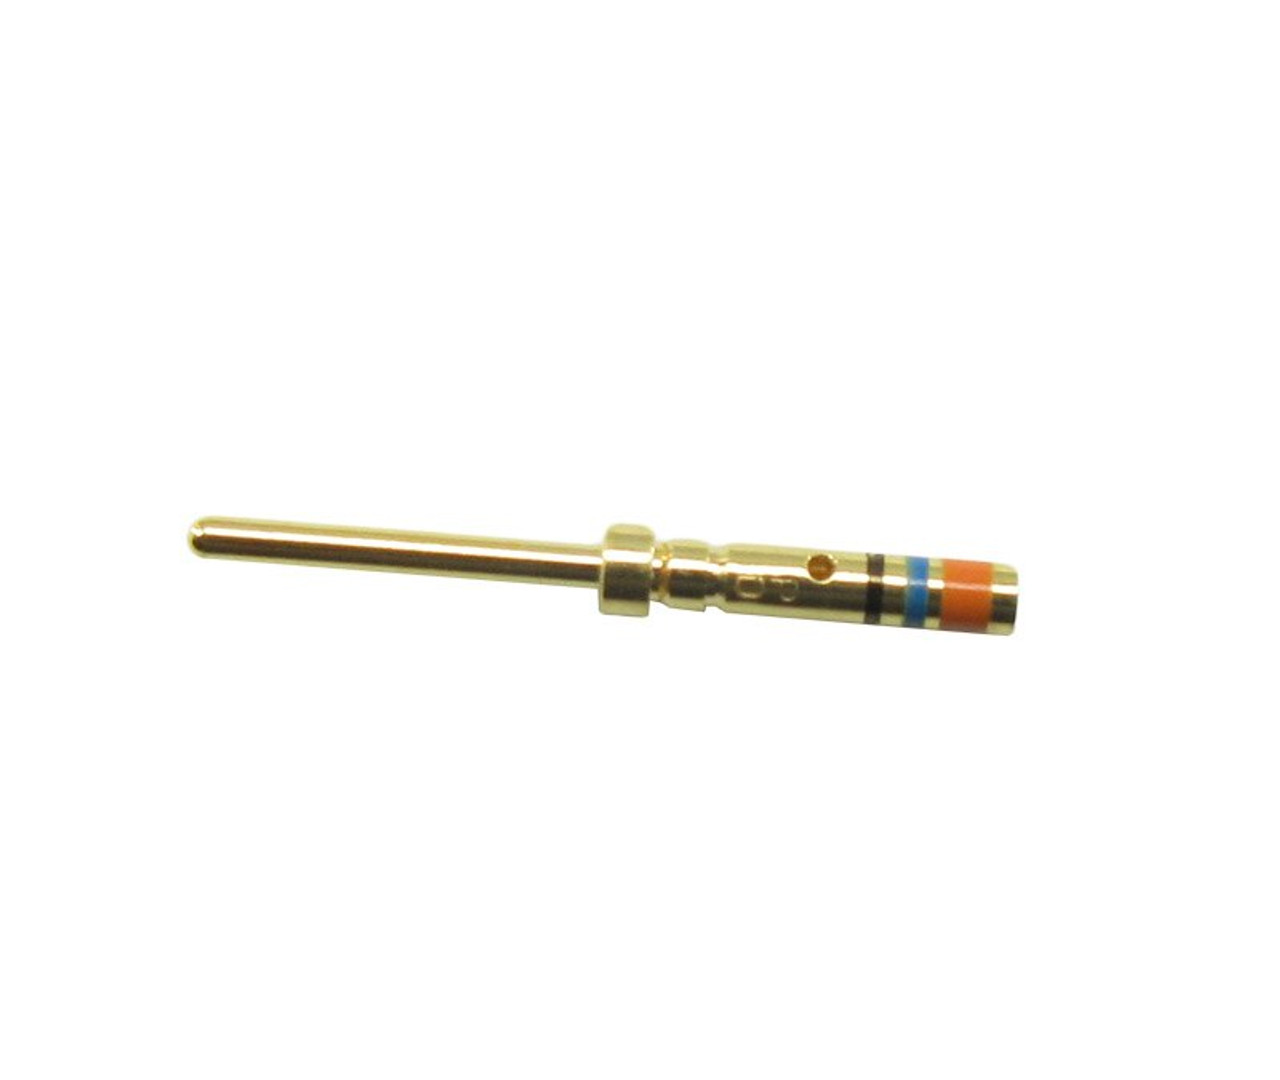 Military Specification M39029/92-534 Contact, Electrical at